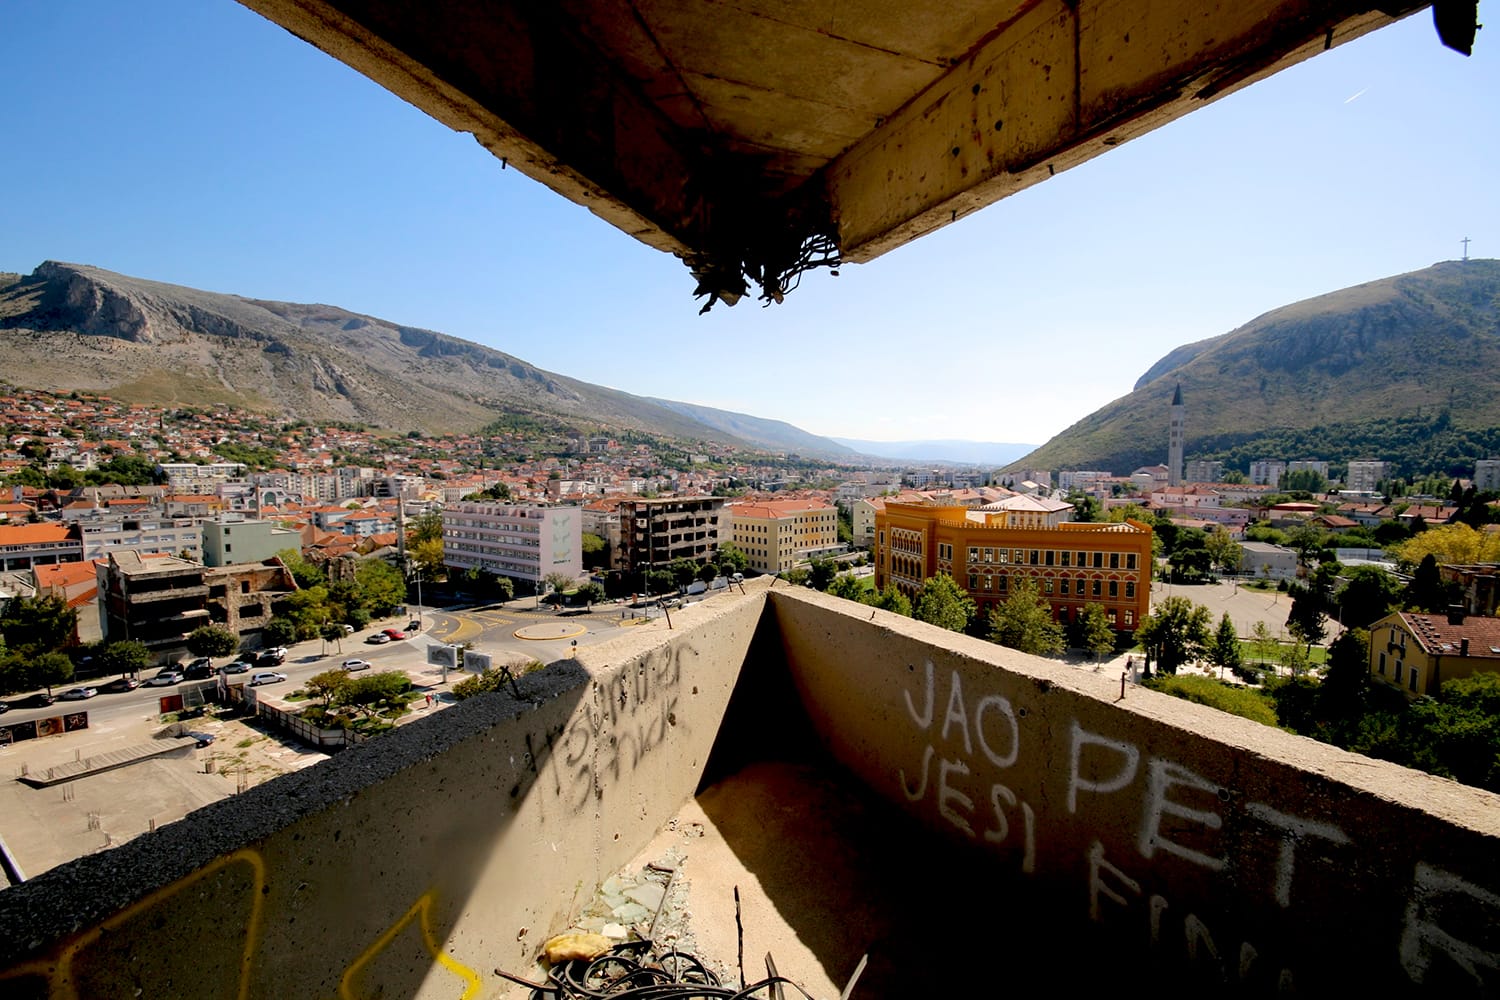 View from abandoned Sniper tower in Mostar, Bosnia & Herzegovina